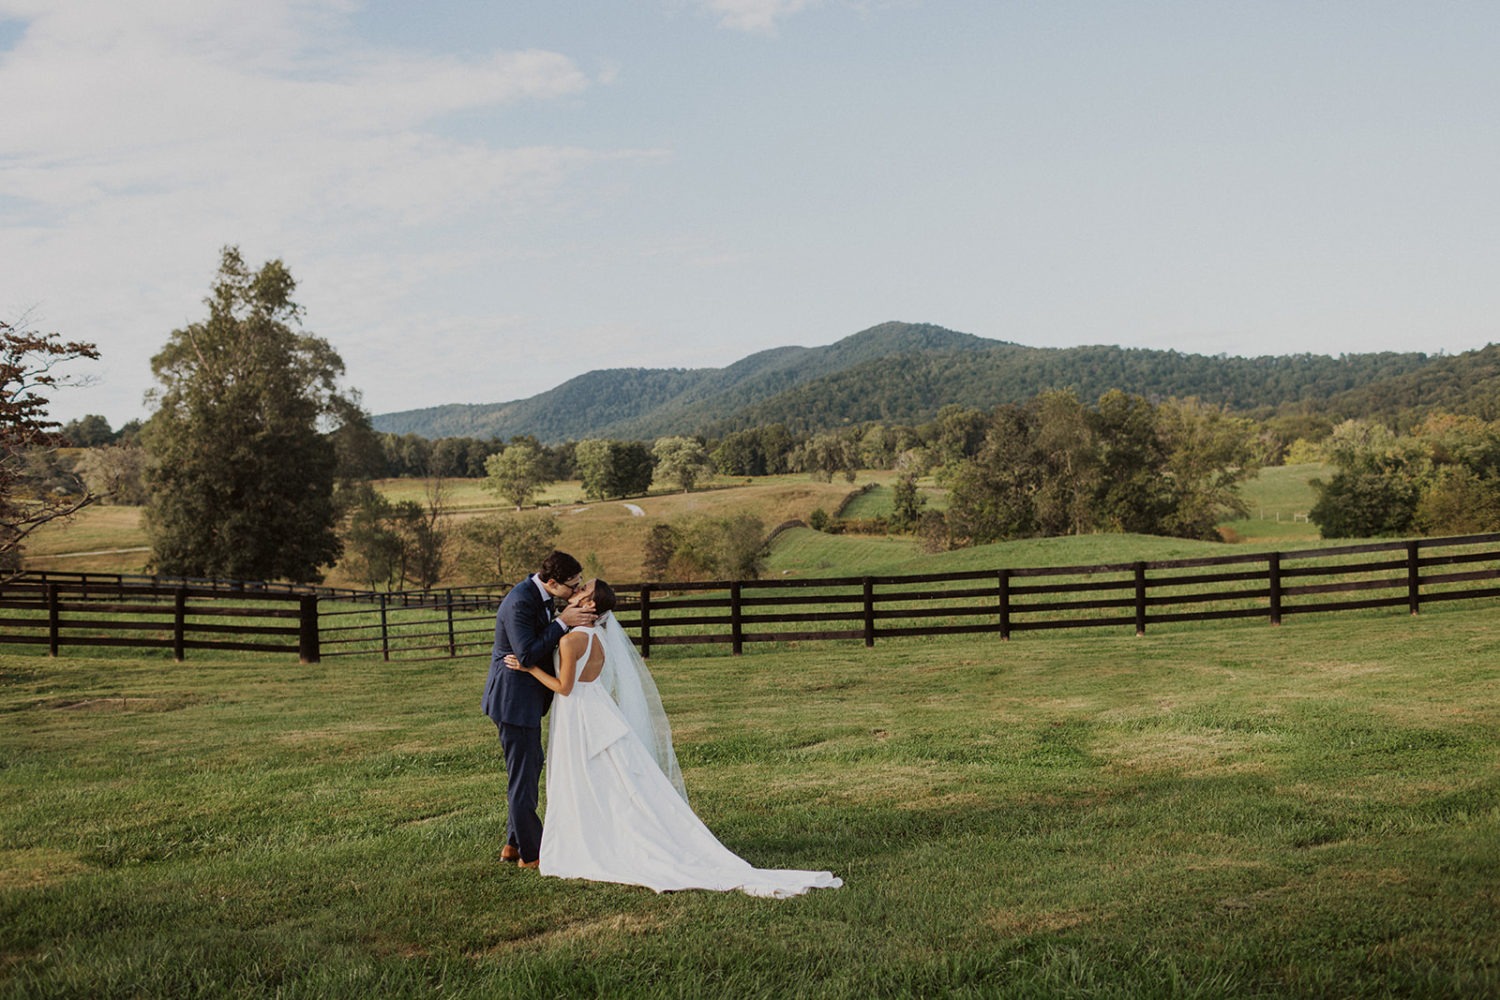 couple kisses in grassy field by mountains at wedding ranch venue